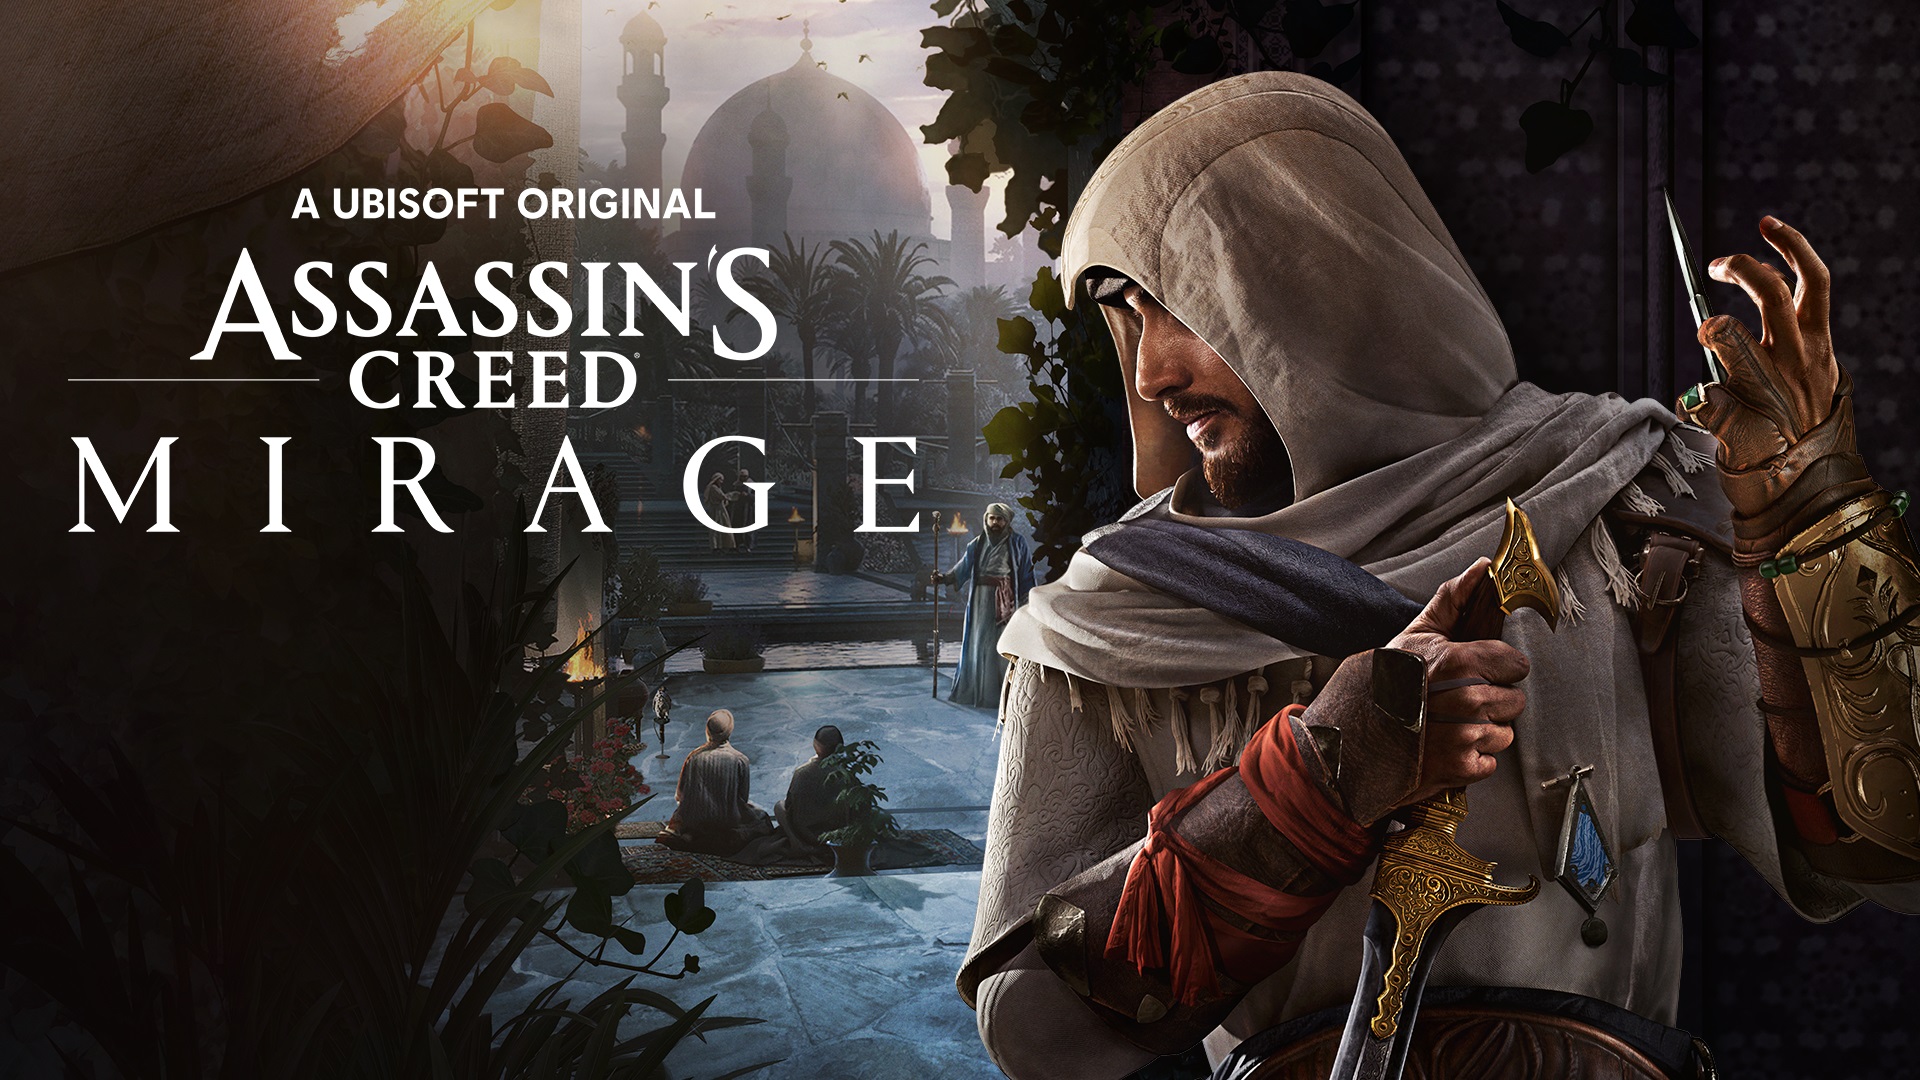 Return to the Middle Ages in Assassin’s Creed Mirage, out now